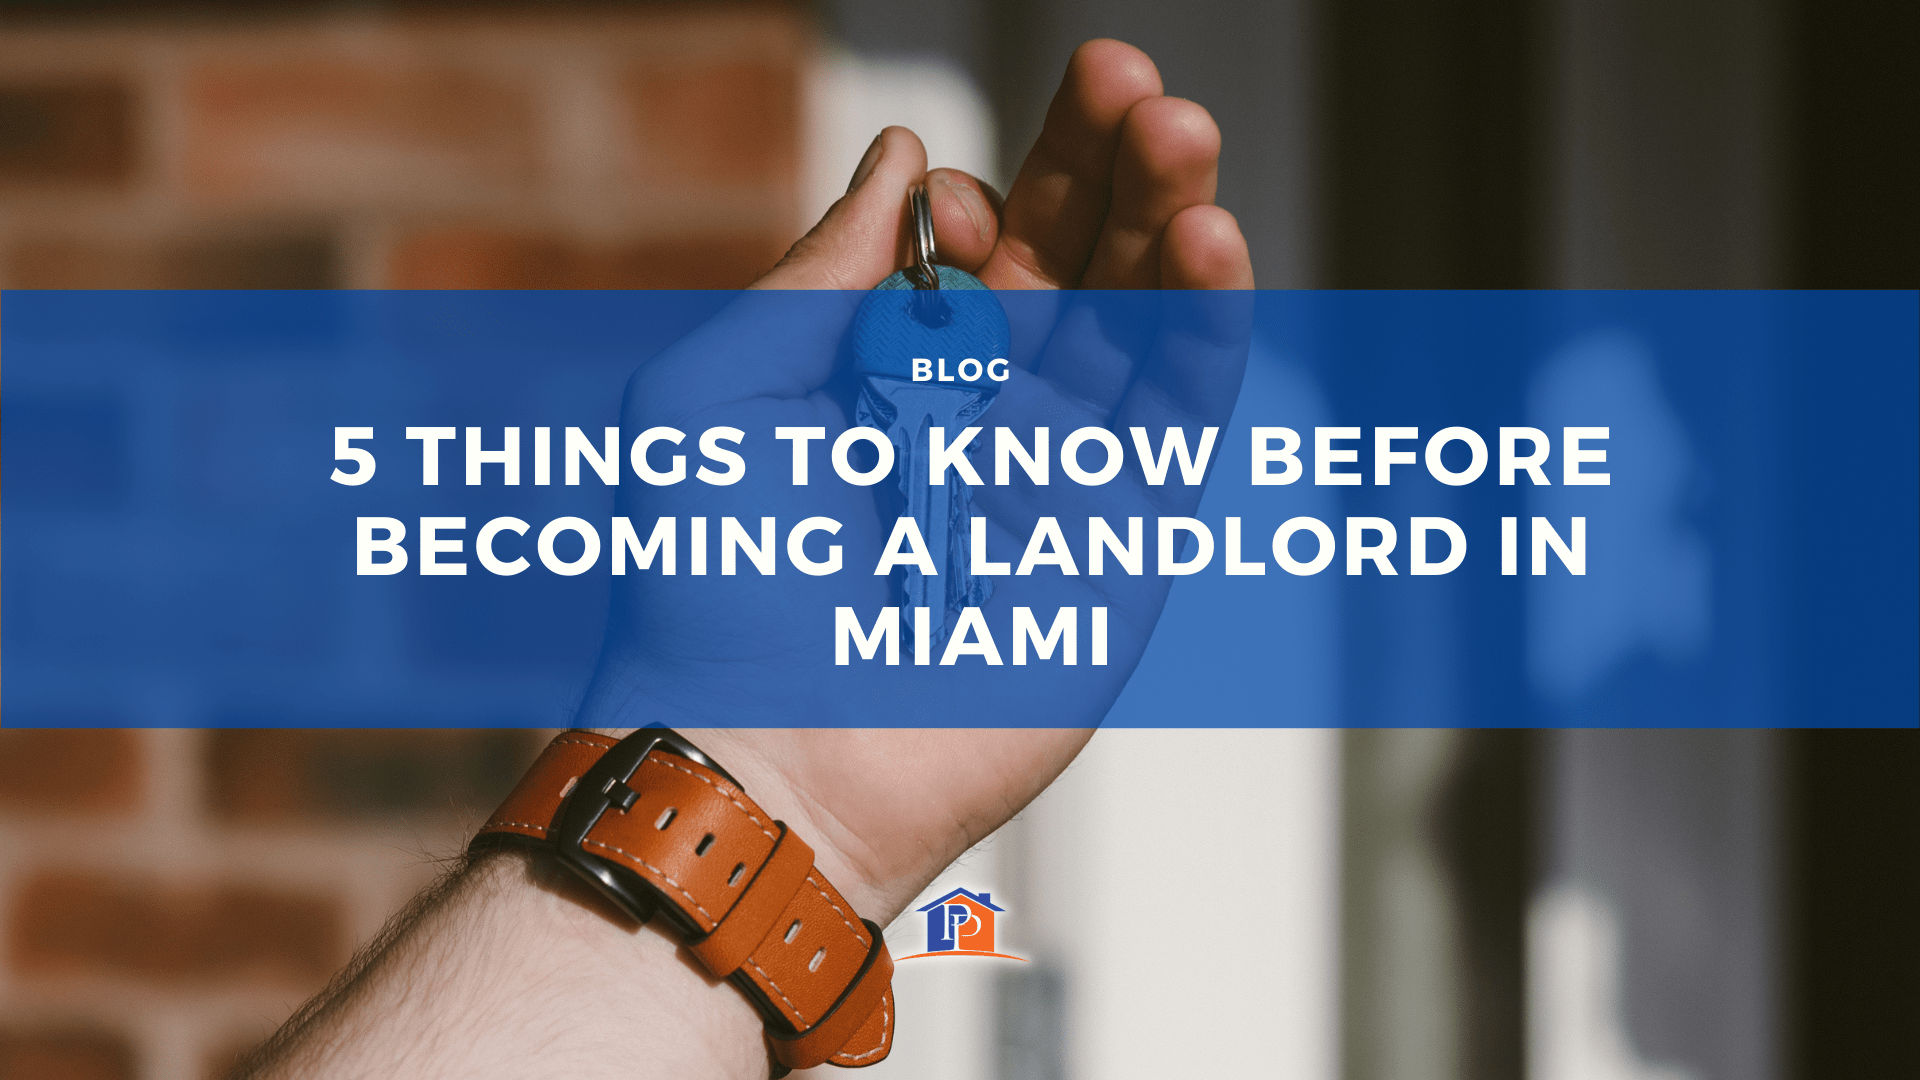 5 things to know before becoming a landlord in Miami